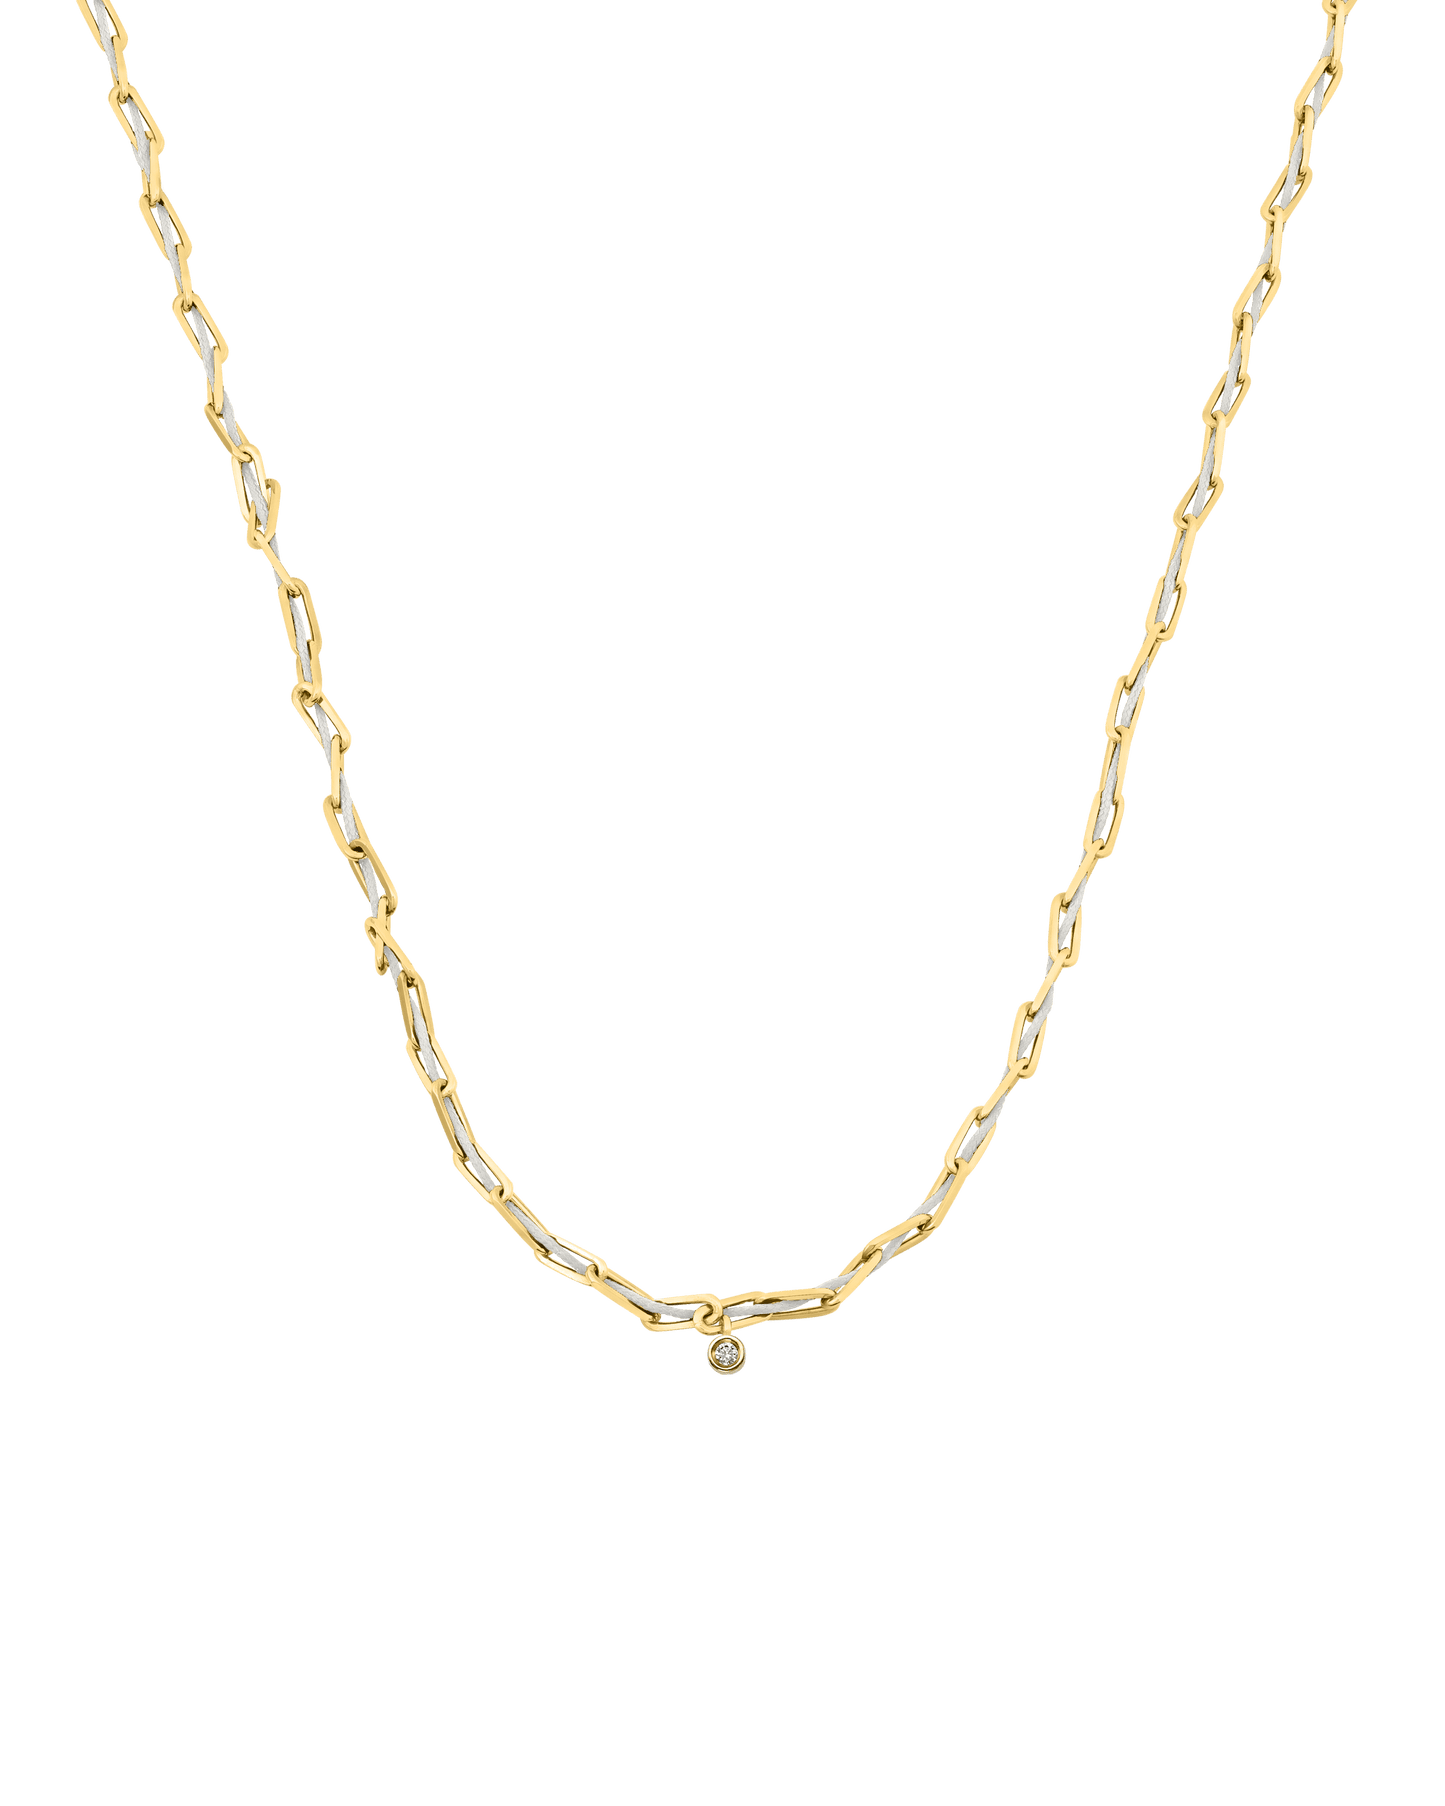 Twine Diamond Necklace - 18K Gold Vermeil Necklaces magal-dev Pearl Small: 0.03ct 16"